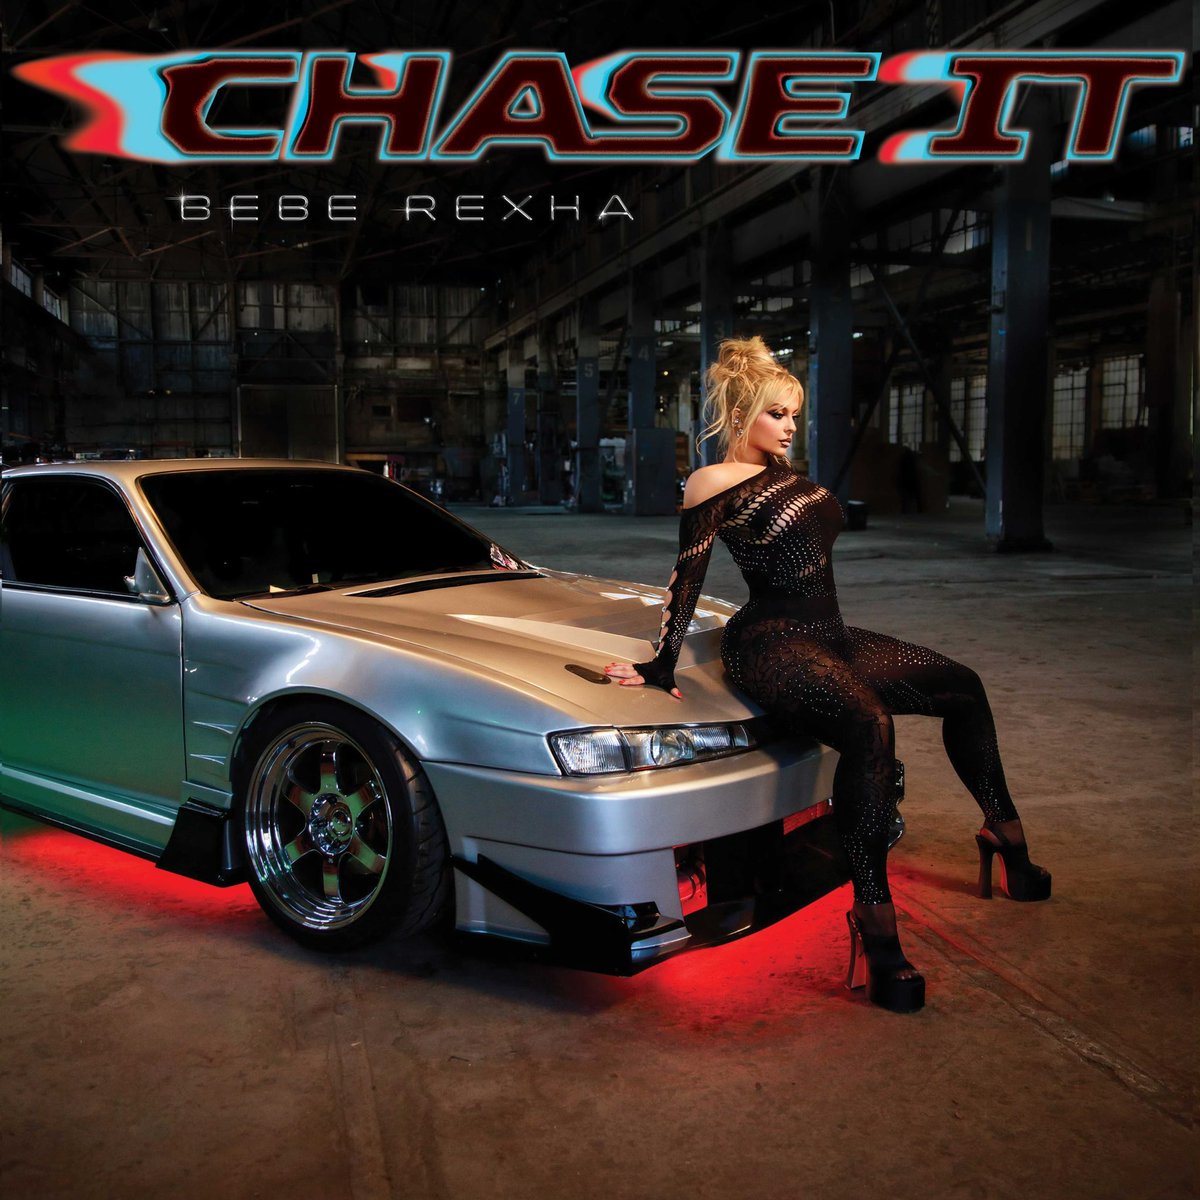 Bebe Rexha announces new single, “Chase It.” 

Out this Friday.